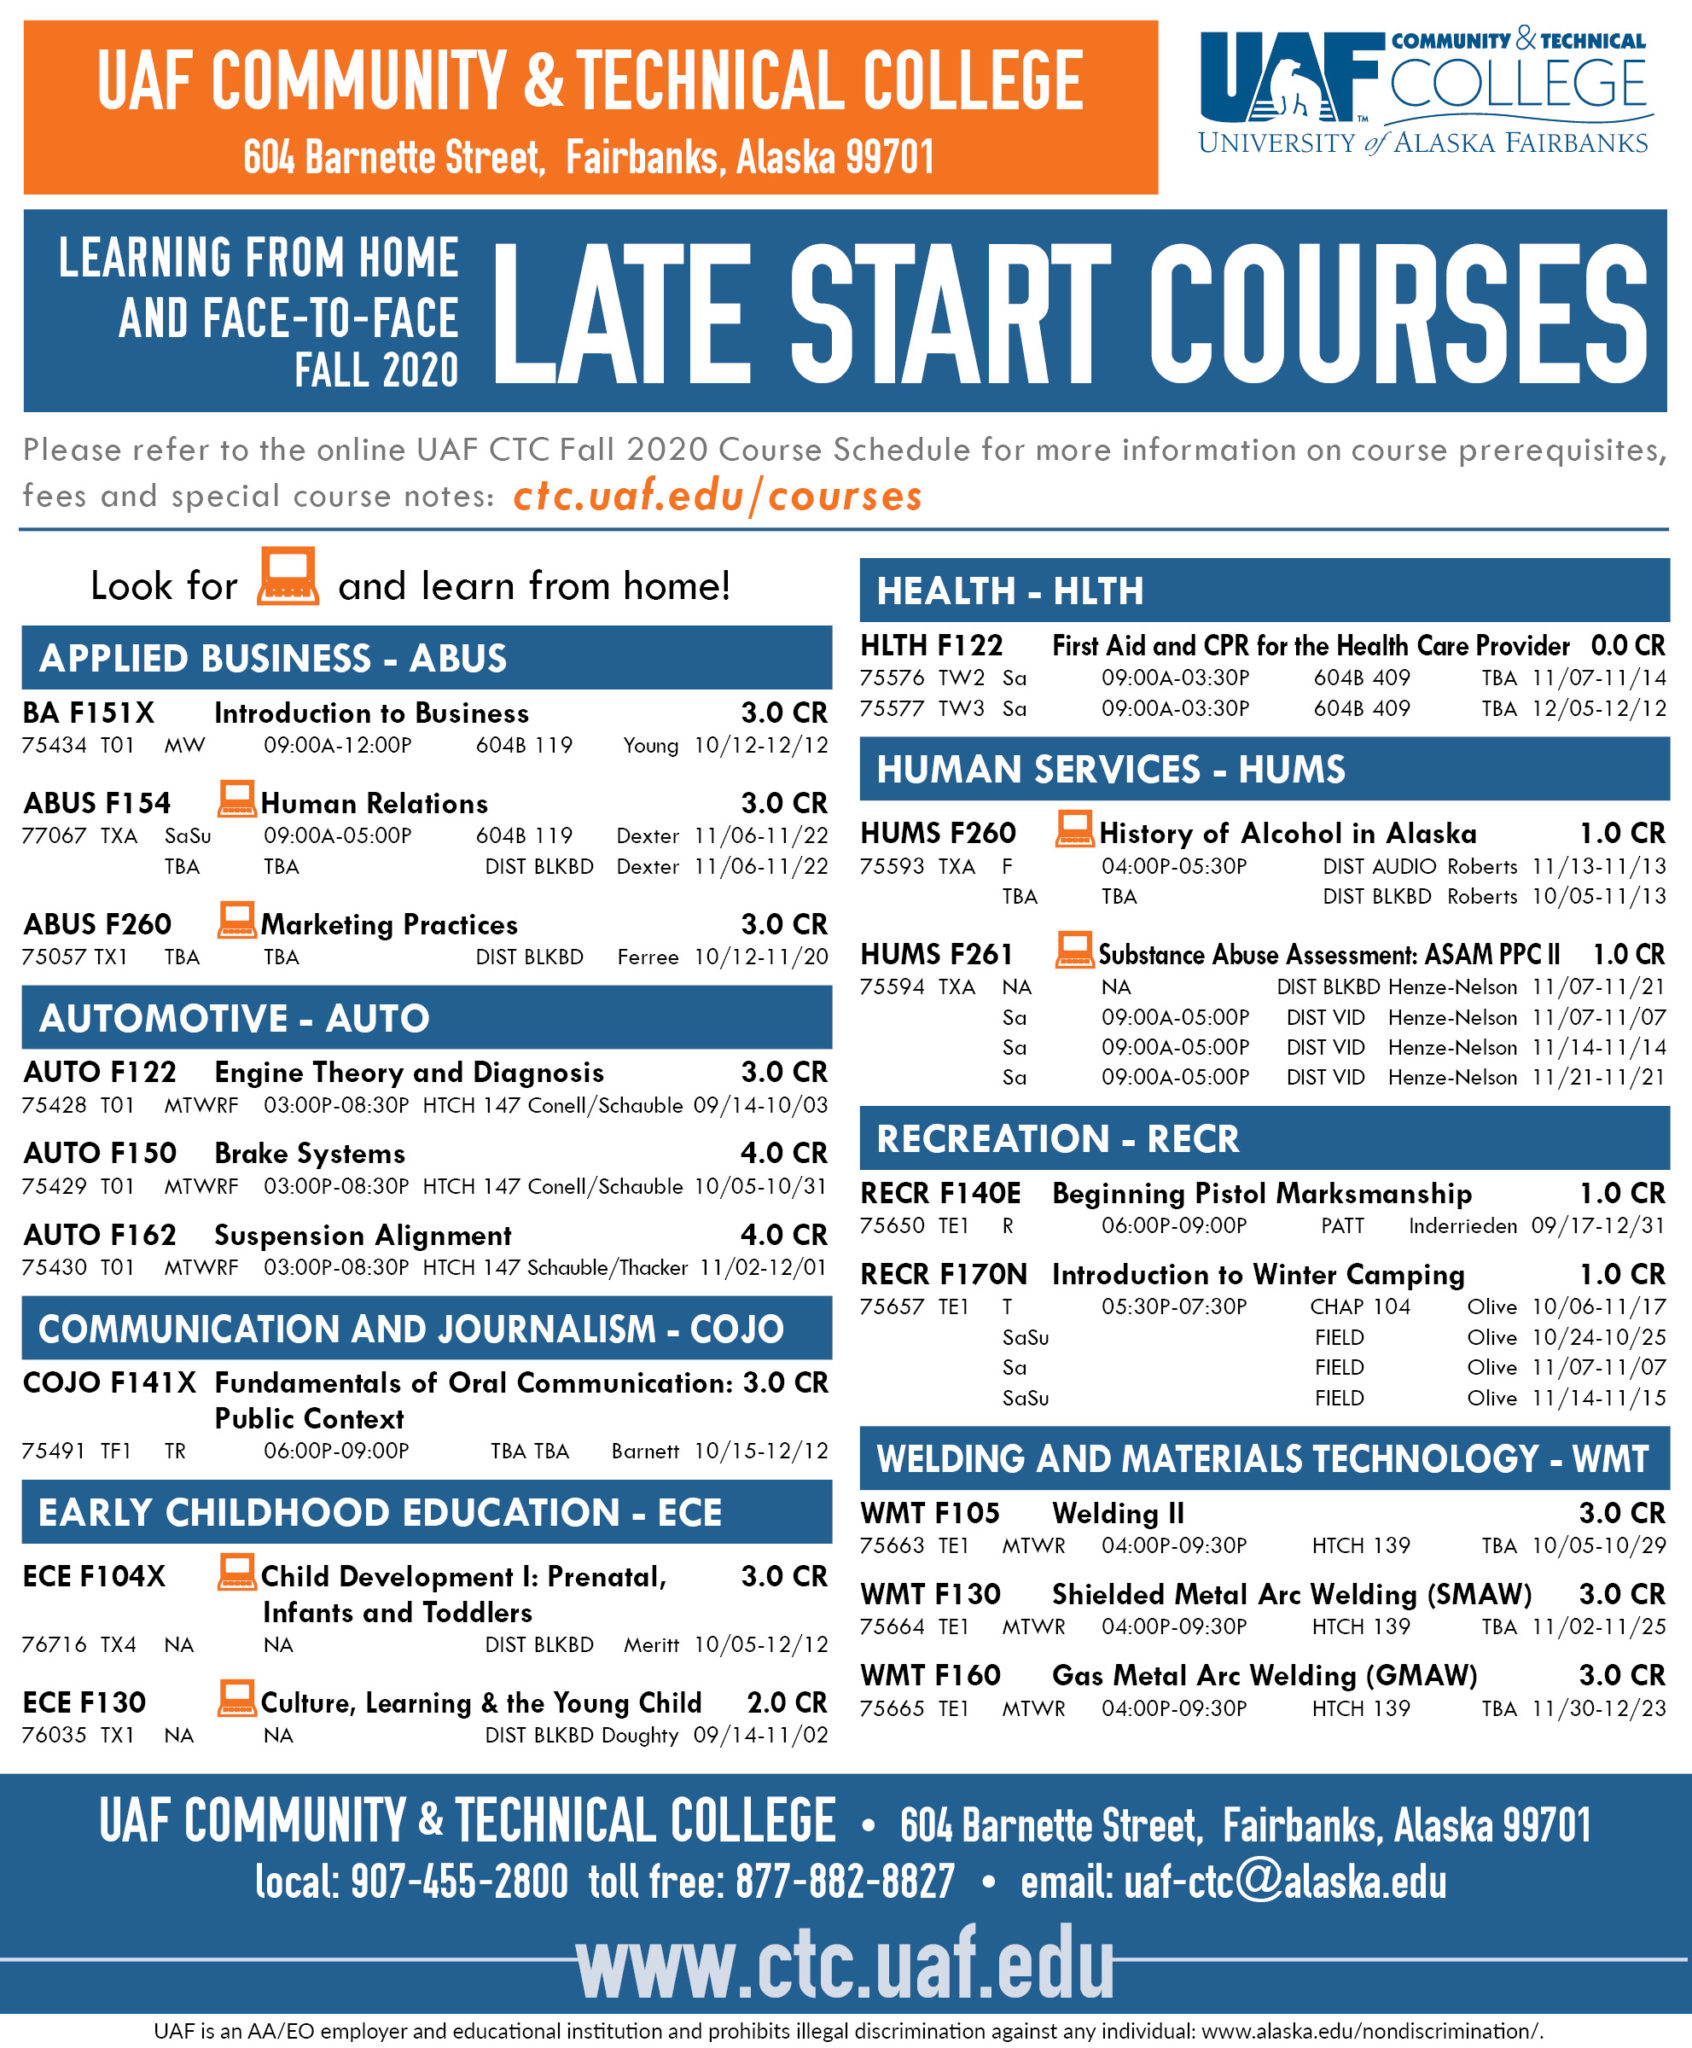 Fall 2020 late start courses open for registration - UAF Community & Technical College